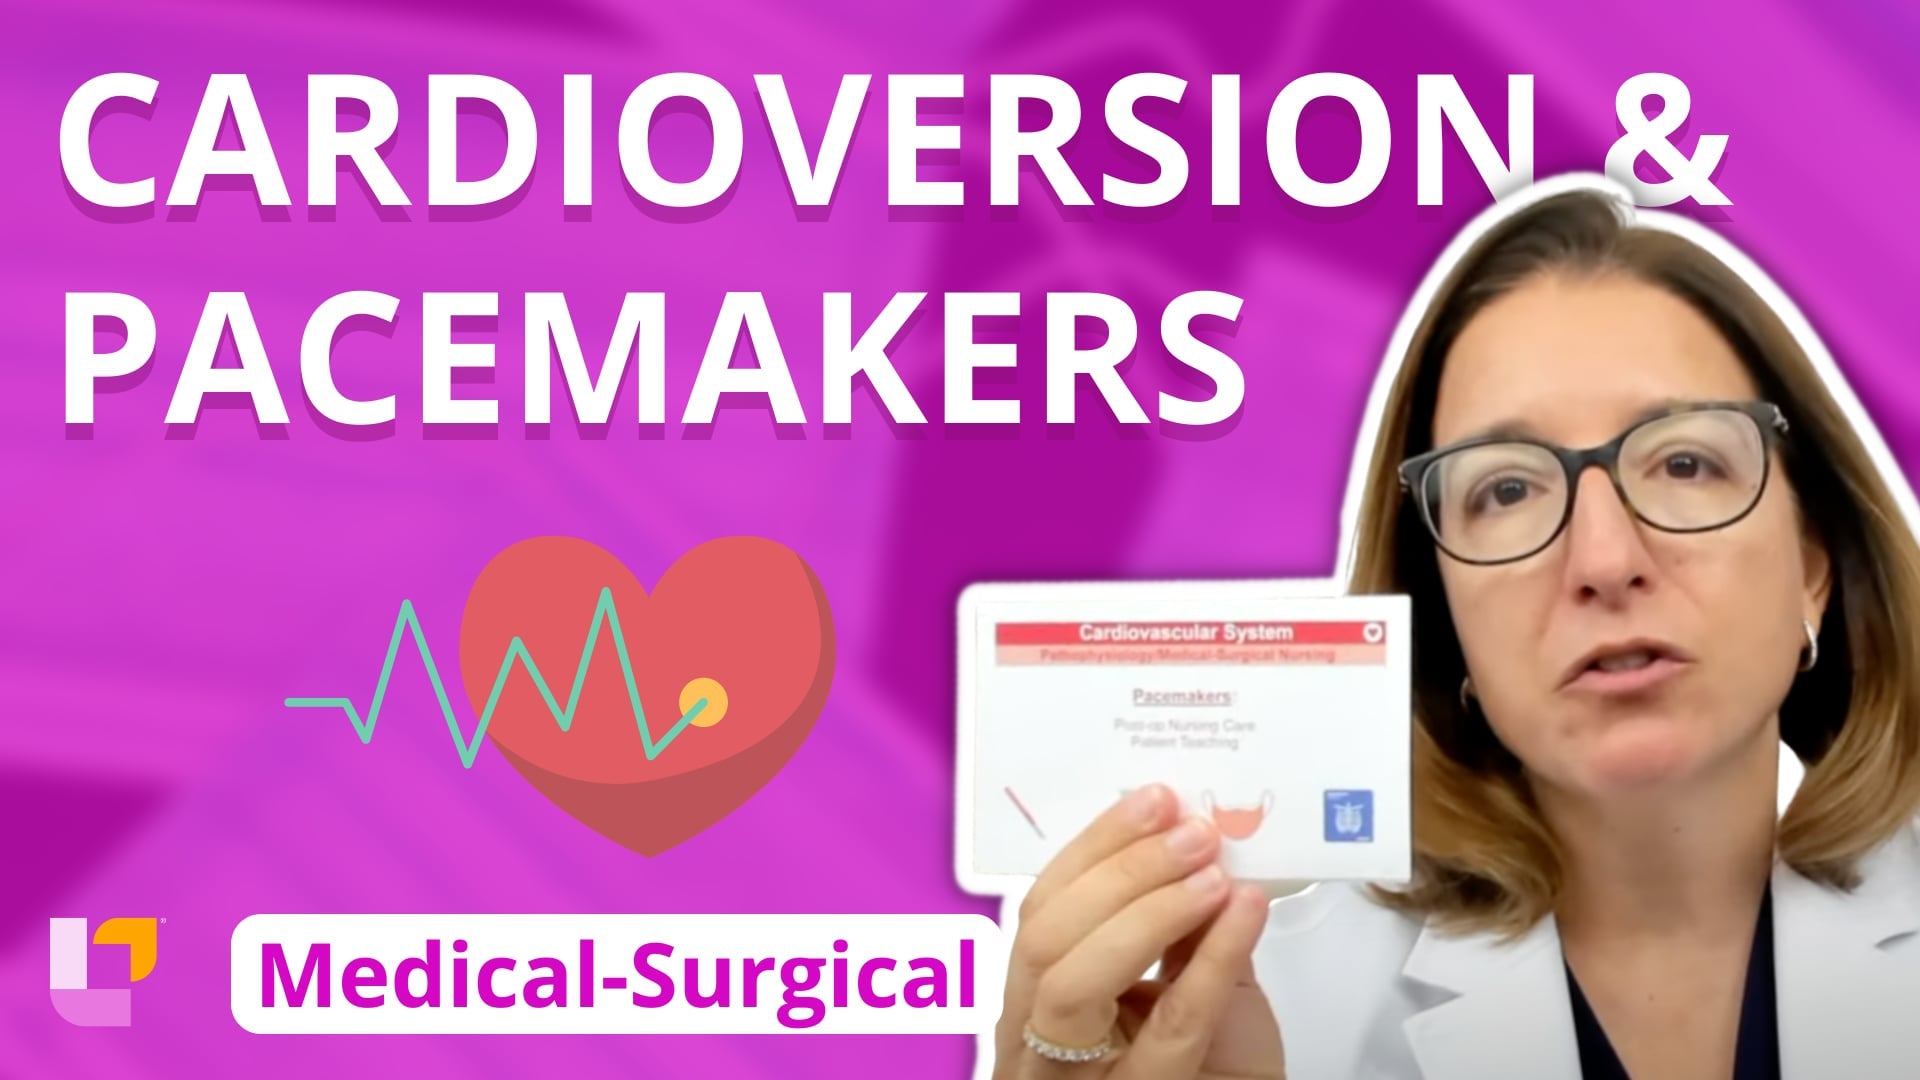 Med-Surg - Cardiovascular System, part 7: Cardioversion, Pacemakers - LevelUpRN